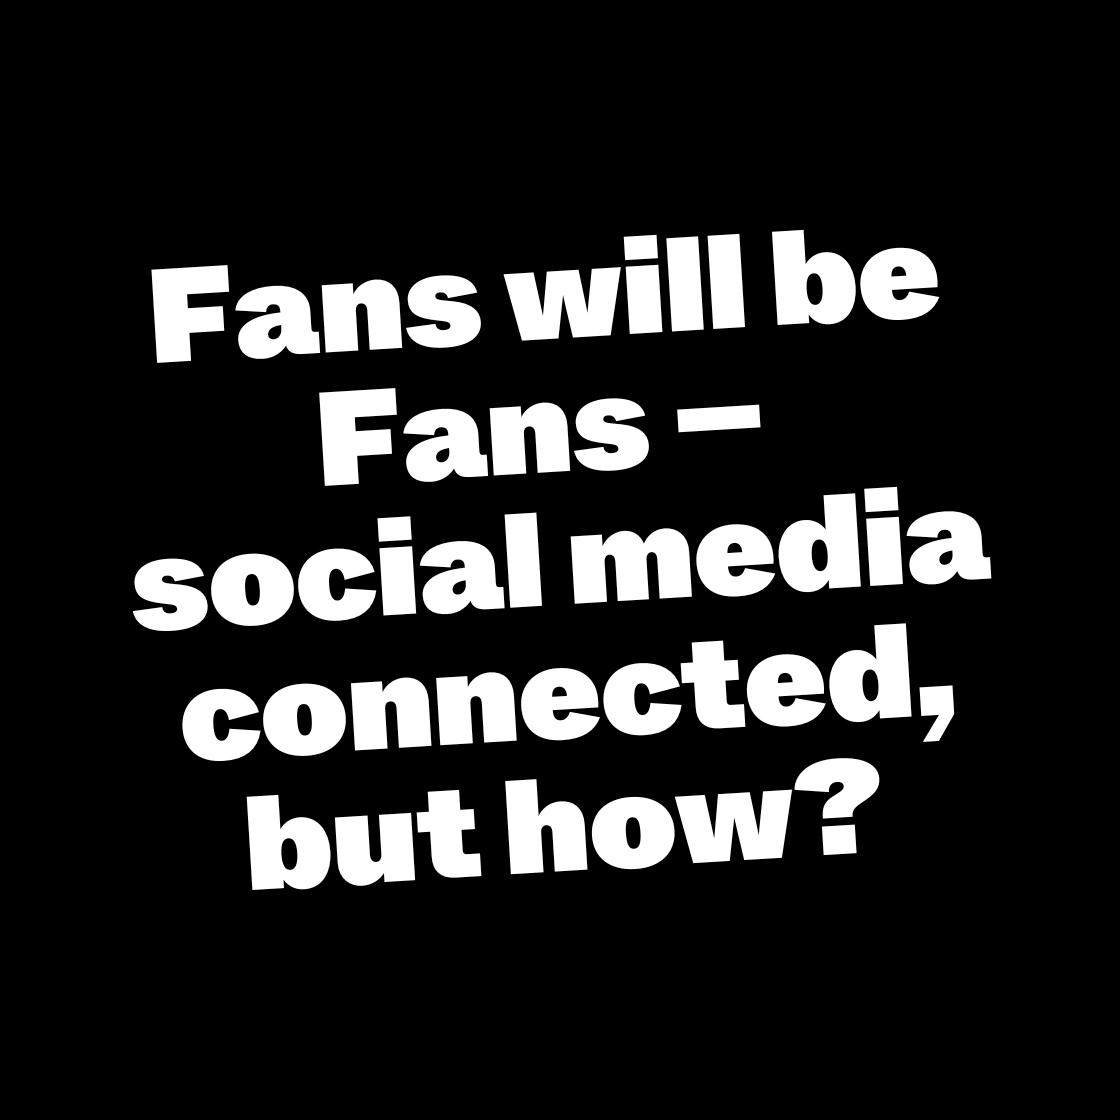 Fans will be fans - social media connected, but how?